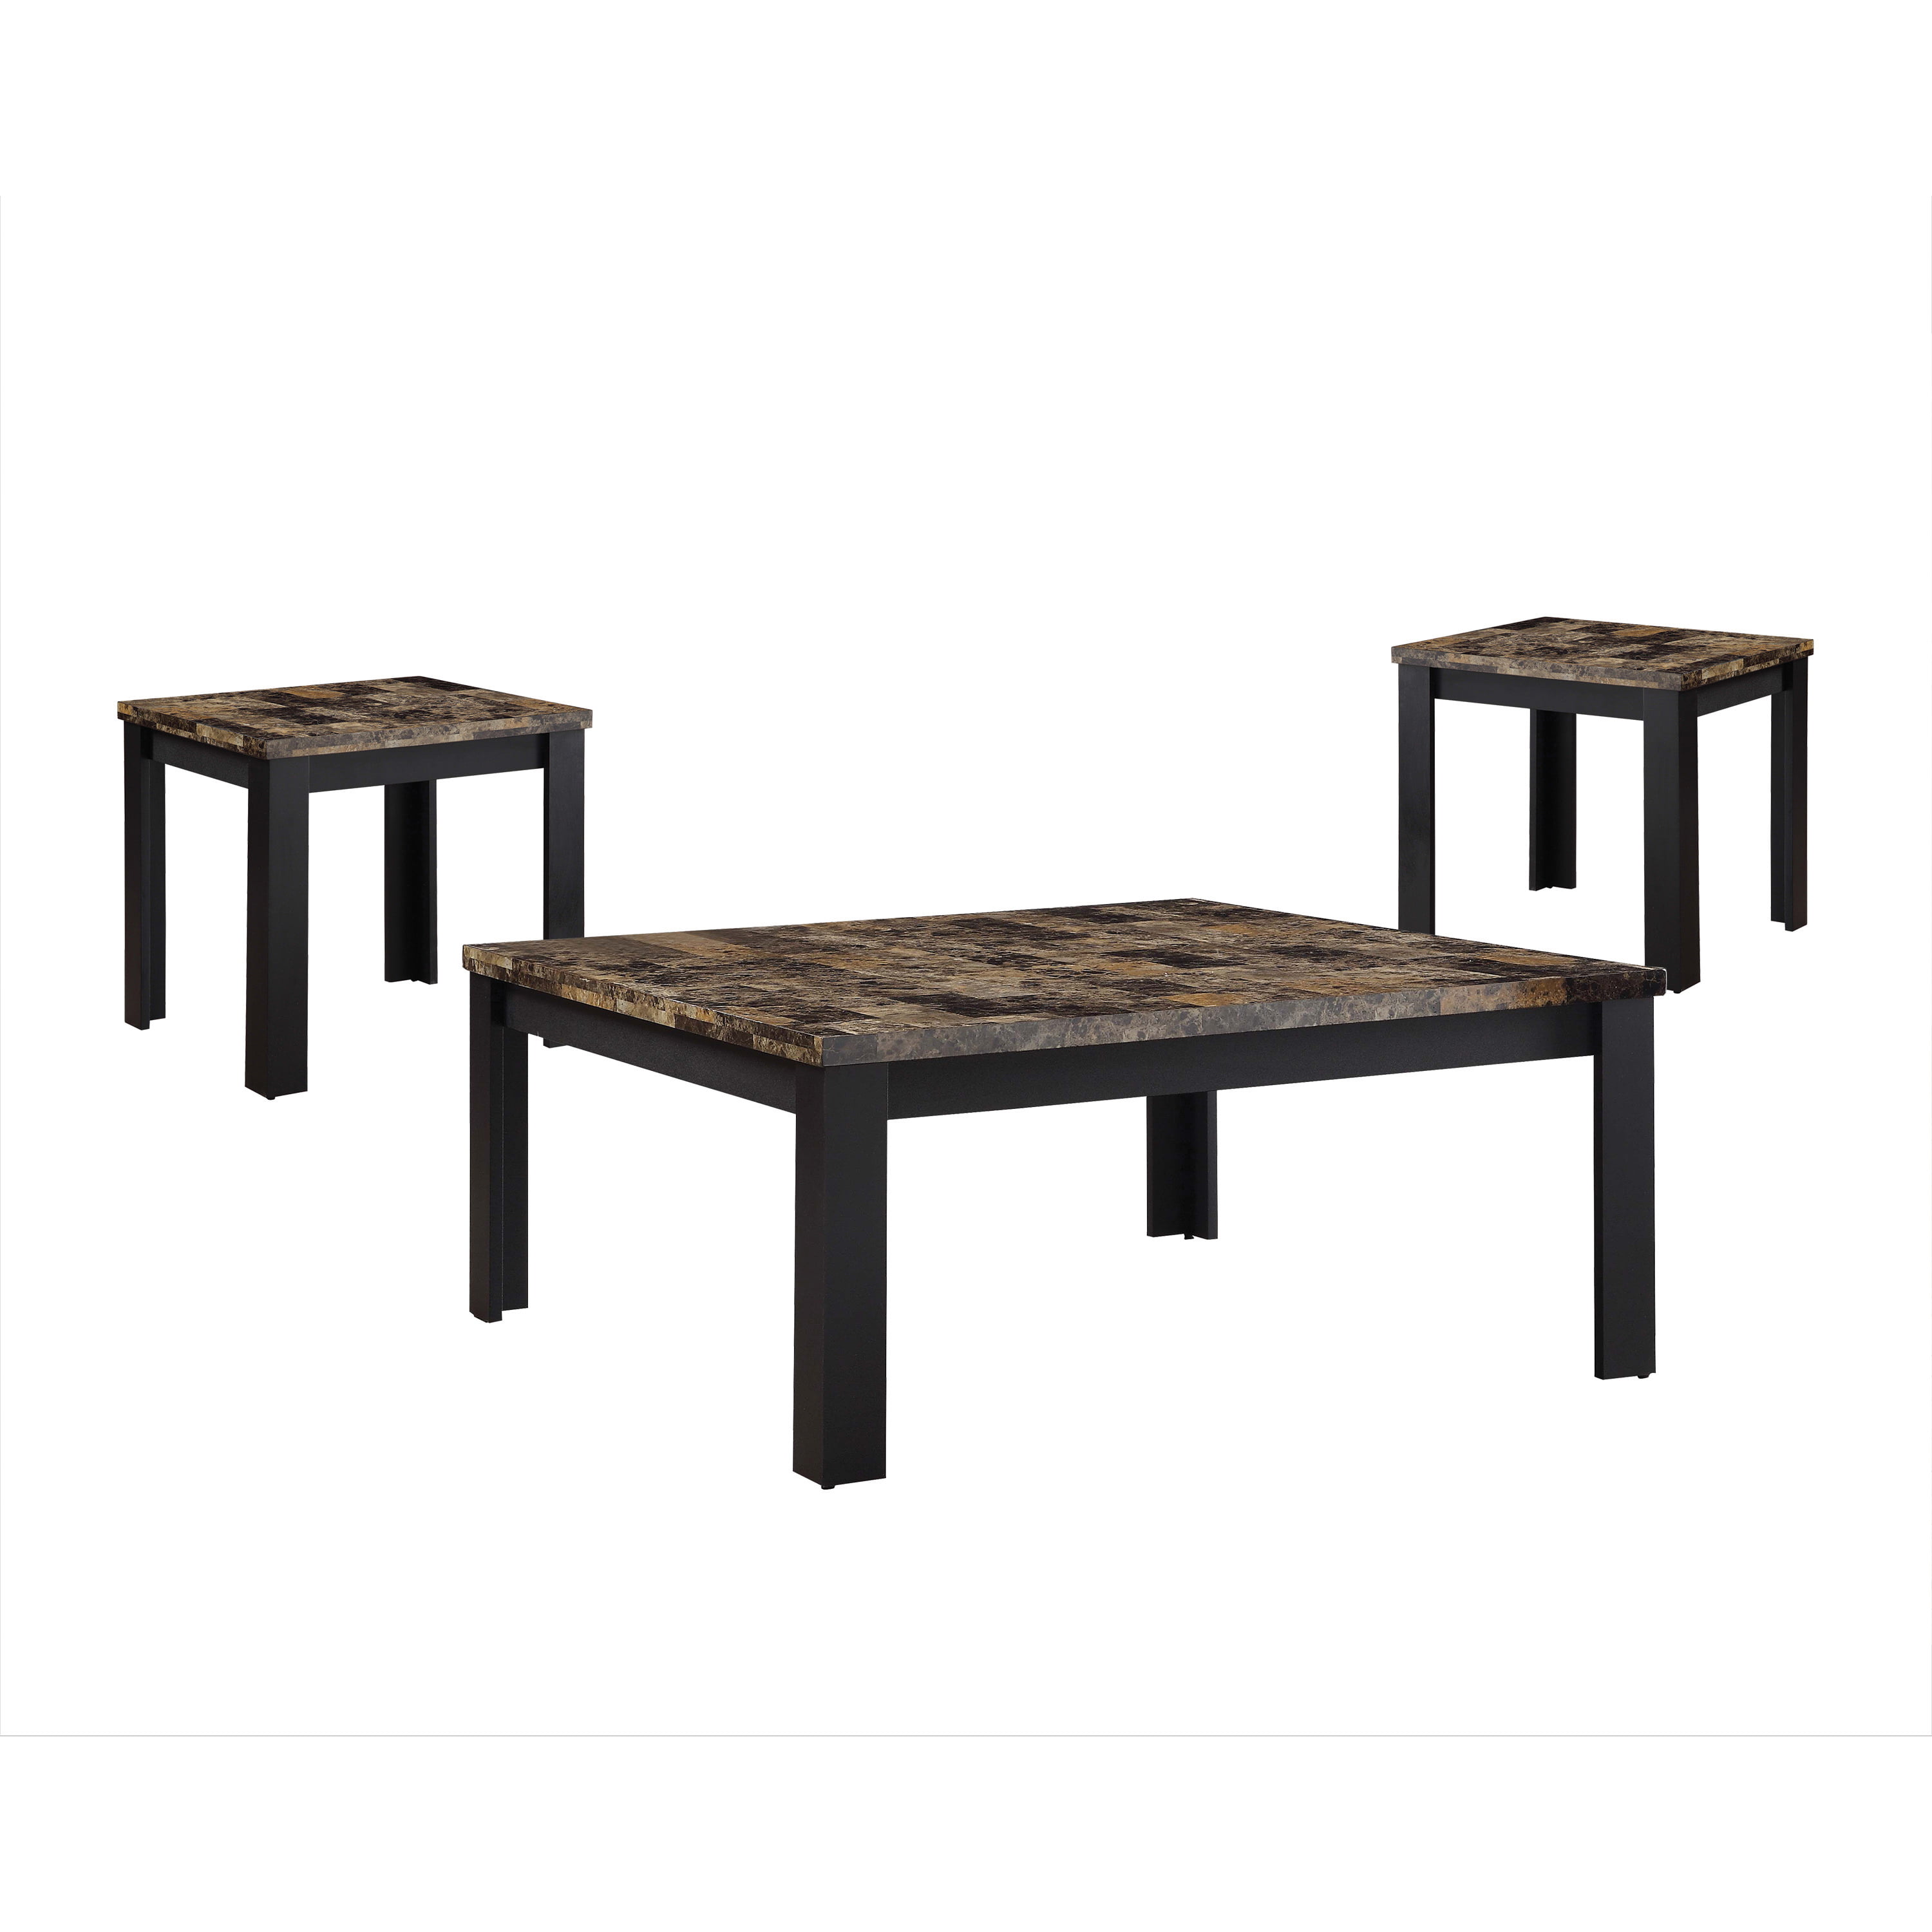 ACME Furniture  Finely 3 Piece Coffee and End Table Set Dark Brown//Black